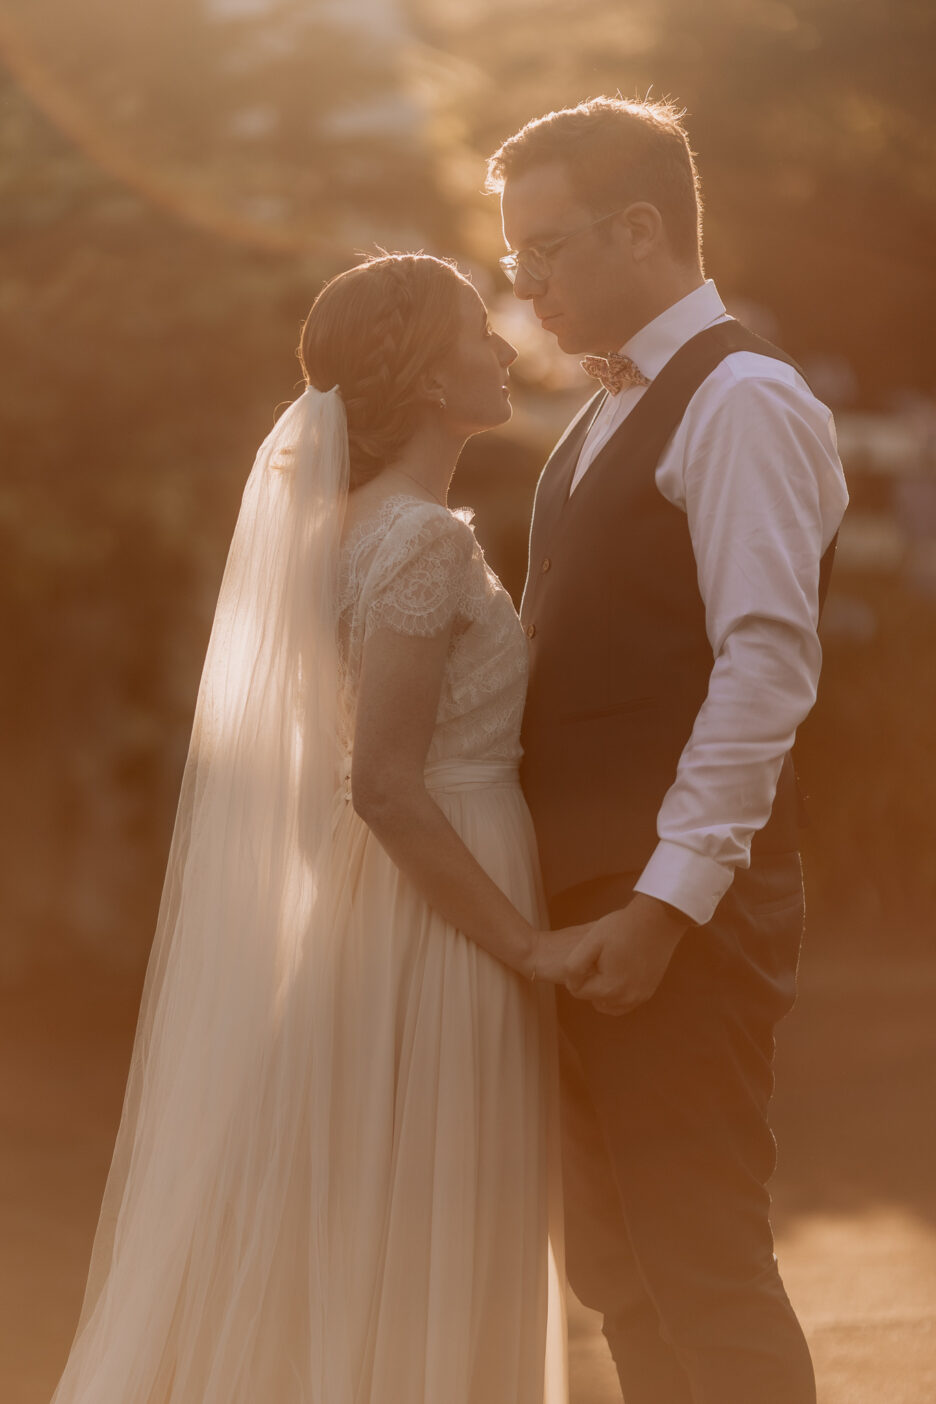 Wedding photographer catches golden light during photos at Old Forest School